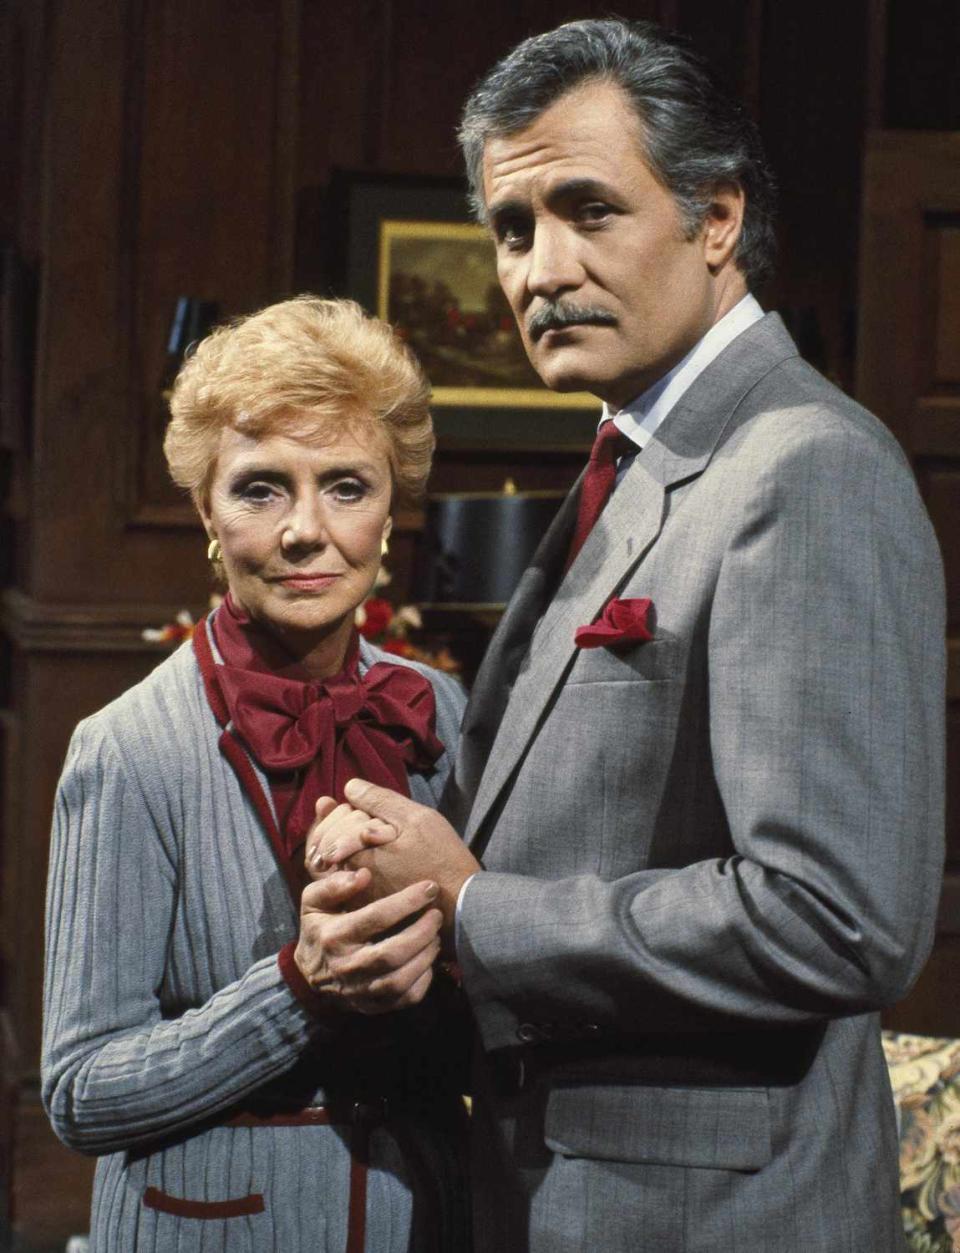 John Aniston Days Of Our Lives Legend And Jennifer Anistons Father Dead At 89 1431